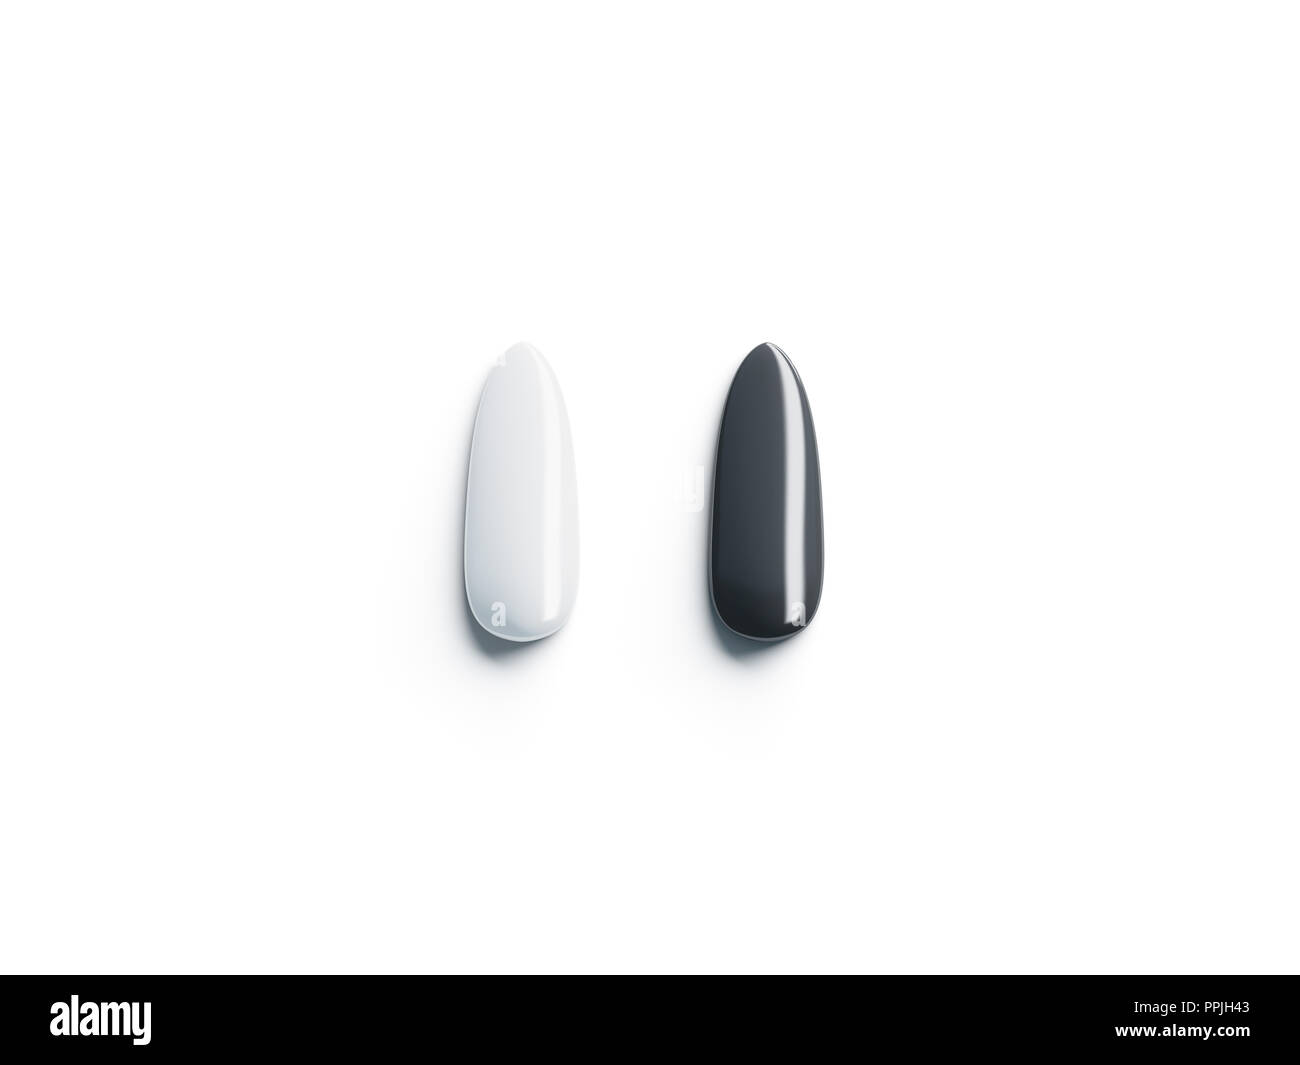 Download Blank Black And White Fake Nails Mockup Top View 3d Rendering Empty Unnaturally Manicure Mock Up Isolated Clean Artificial Fingernails Template False Manicured Acrylic Gel Lacquer For Branding Stock Photo Alamy